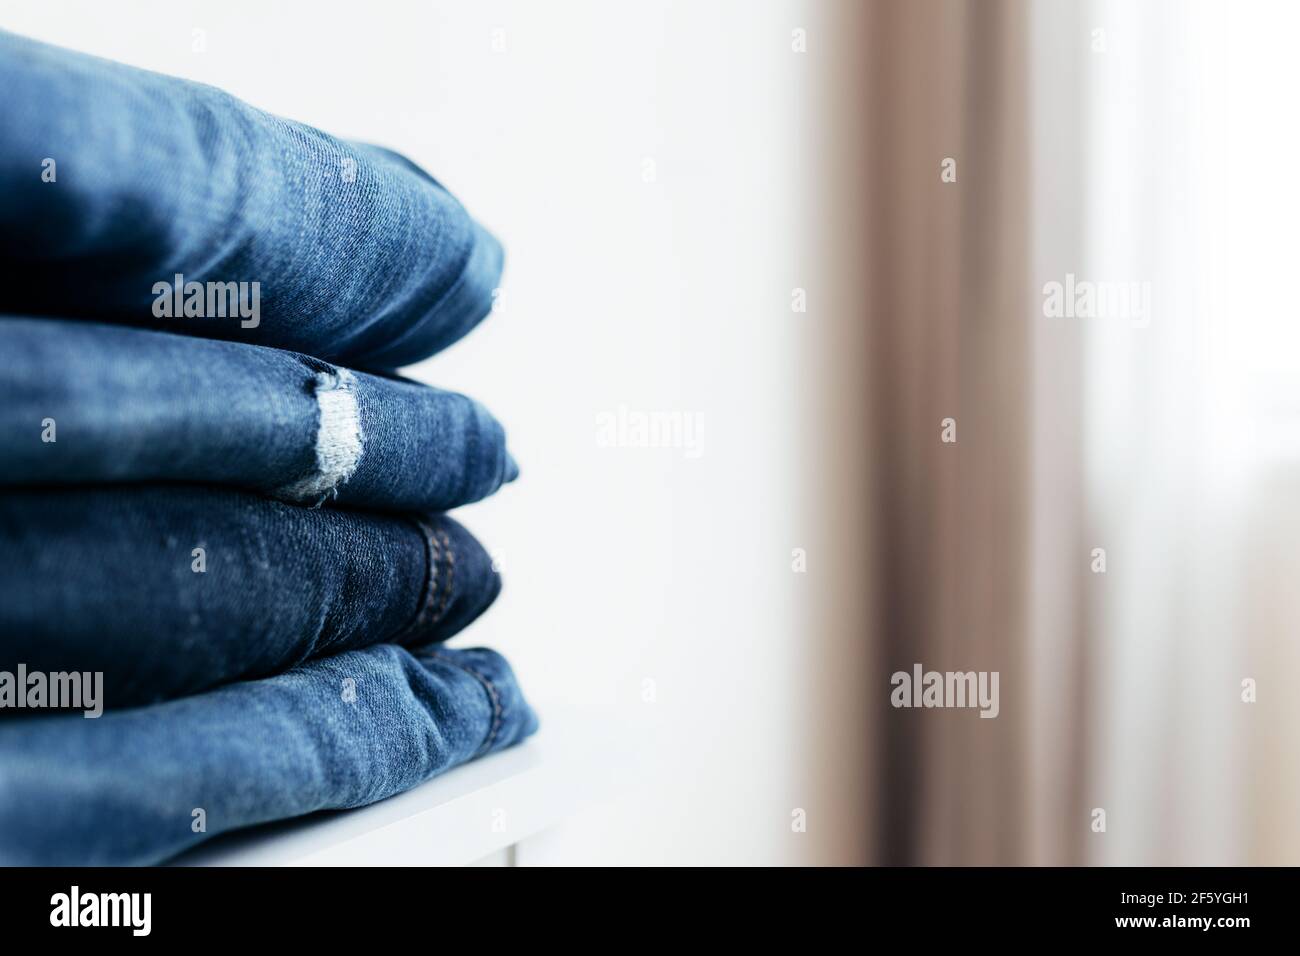 A stack of blue denim jeans or pants. Textile industry concept. Clothing stores concept. Sale concept. High quality photo Stock Photo